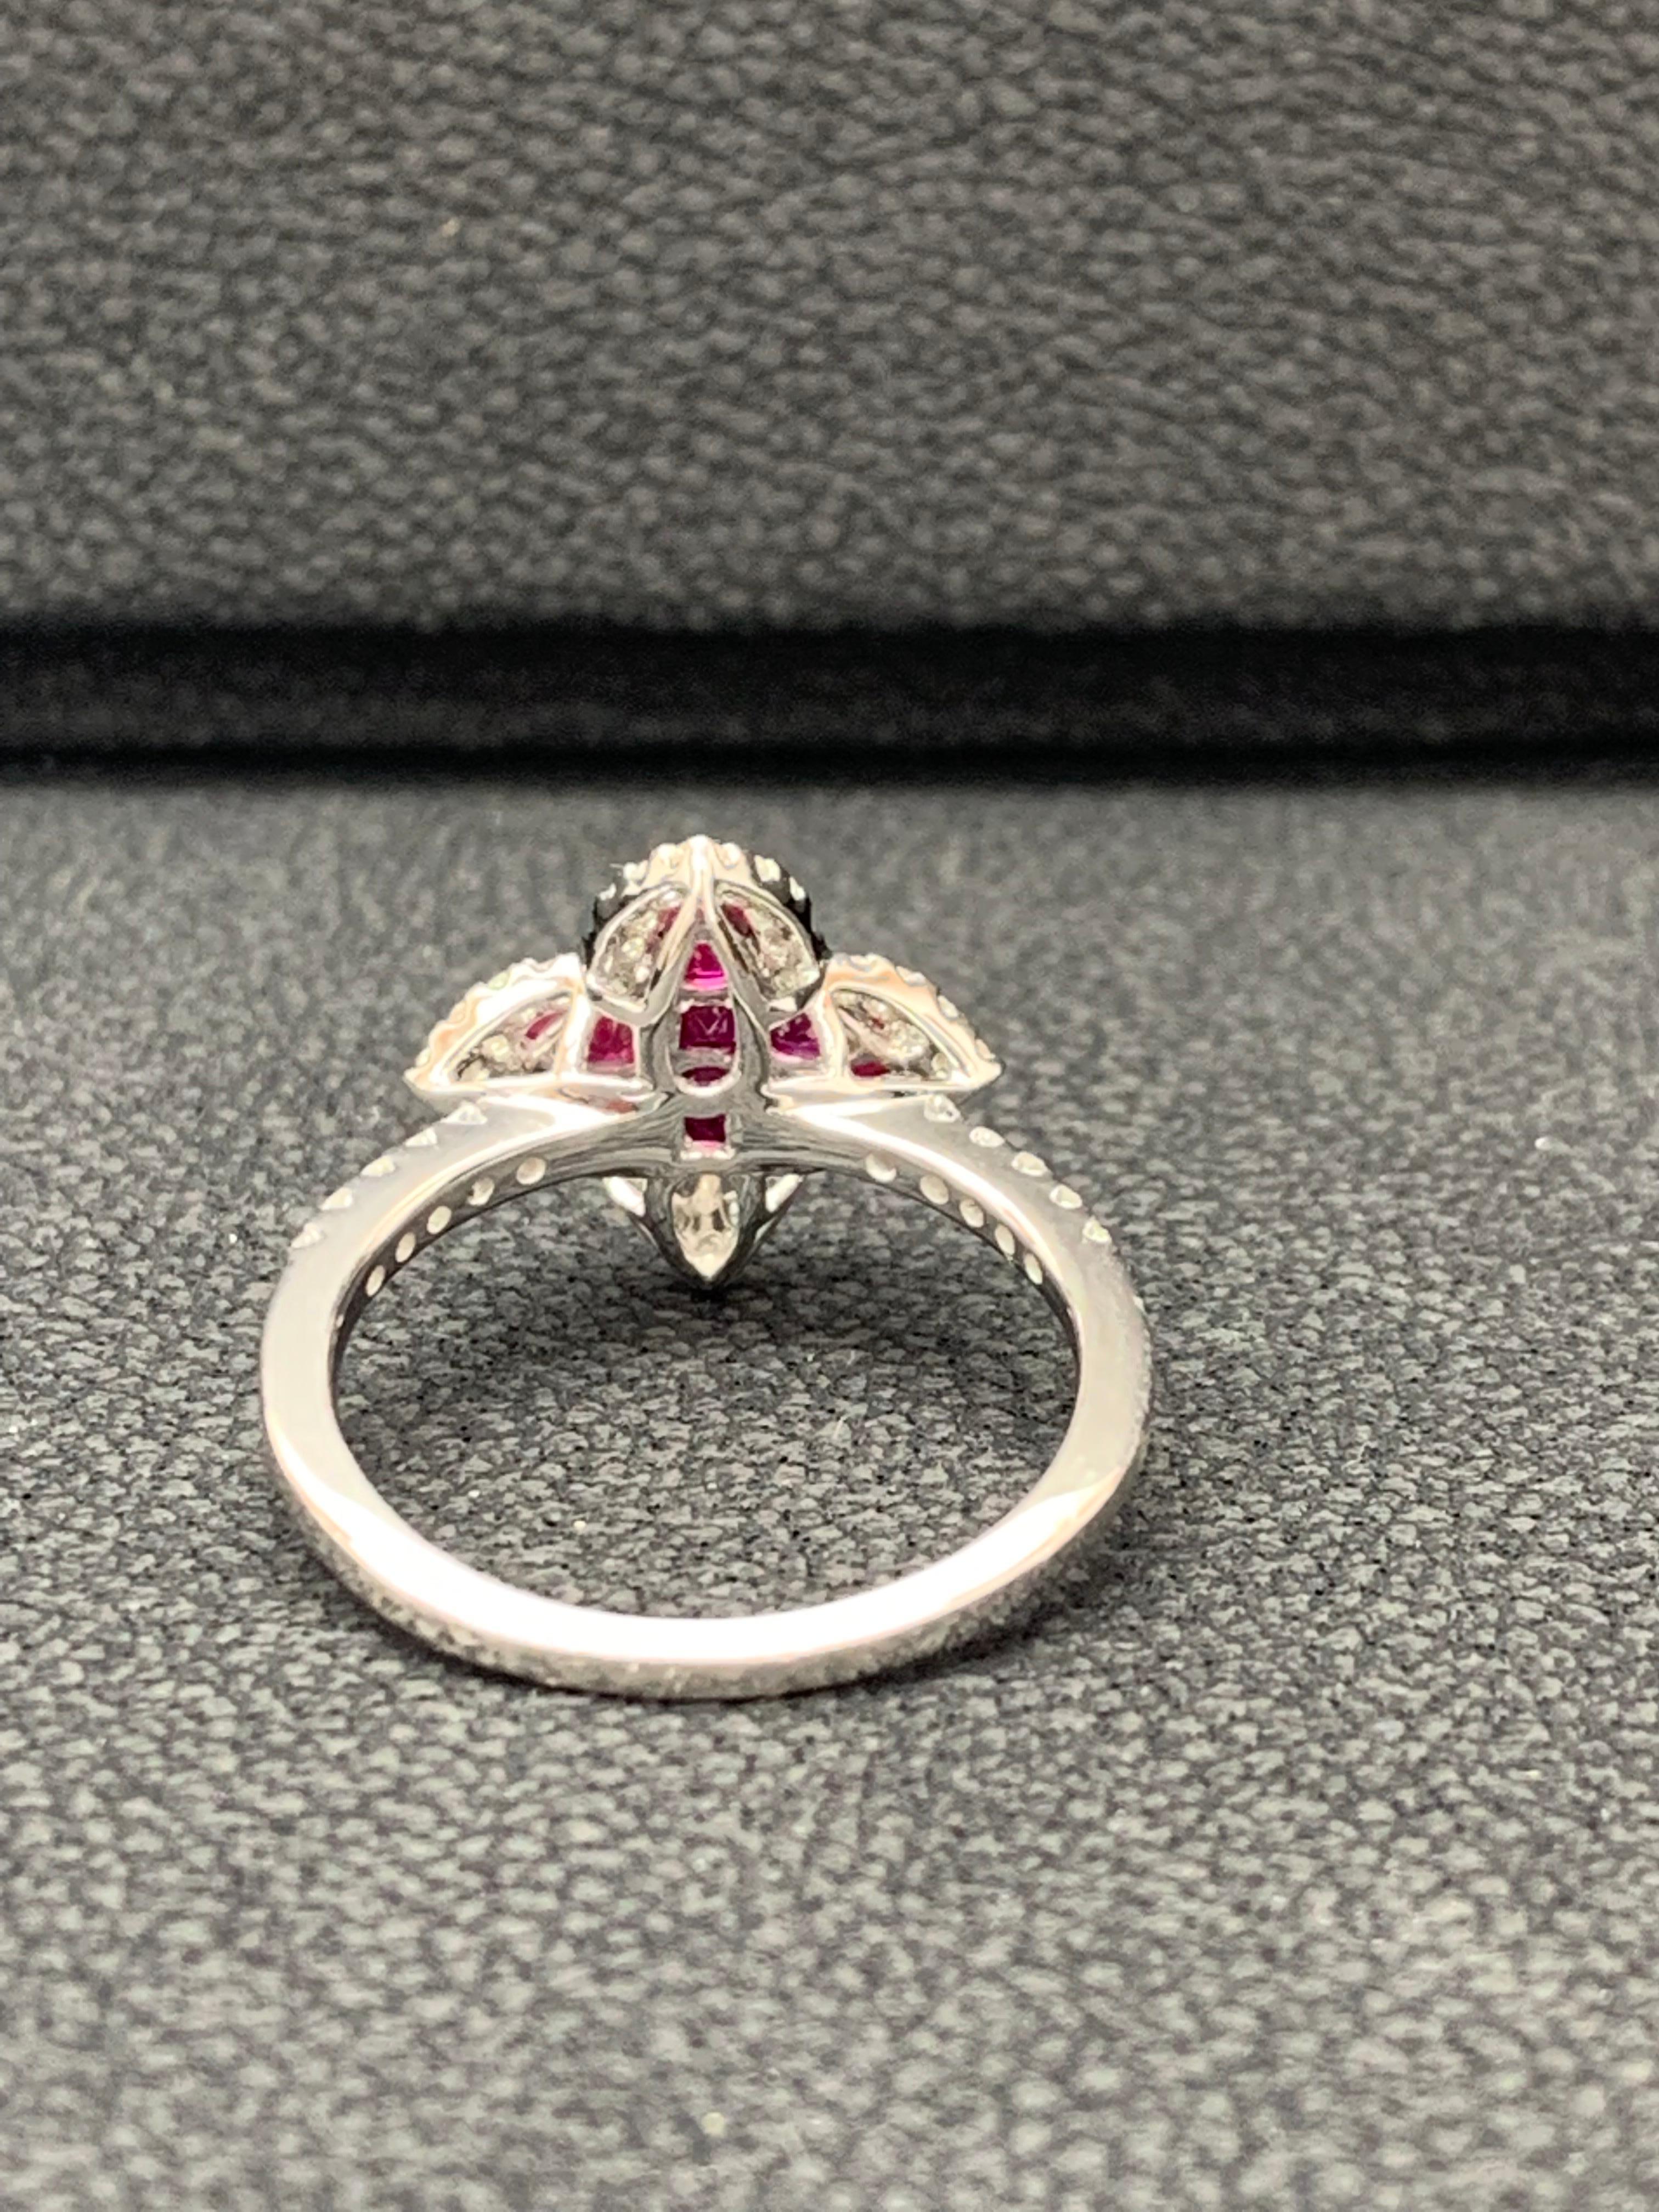 0.70 Carat Pear Shape Ruby and Diamond Cocktail Ring in 18K White Gold For Sale 1